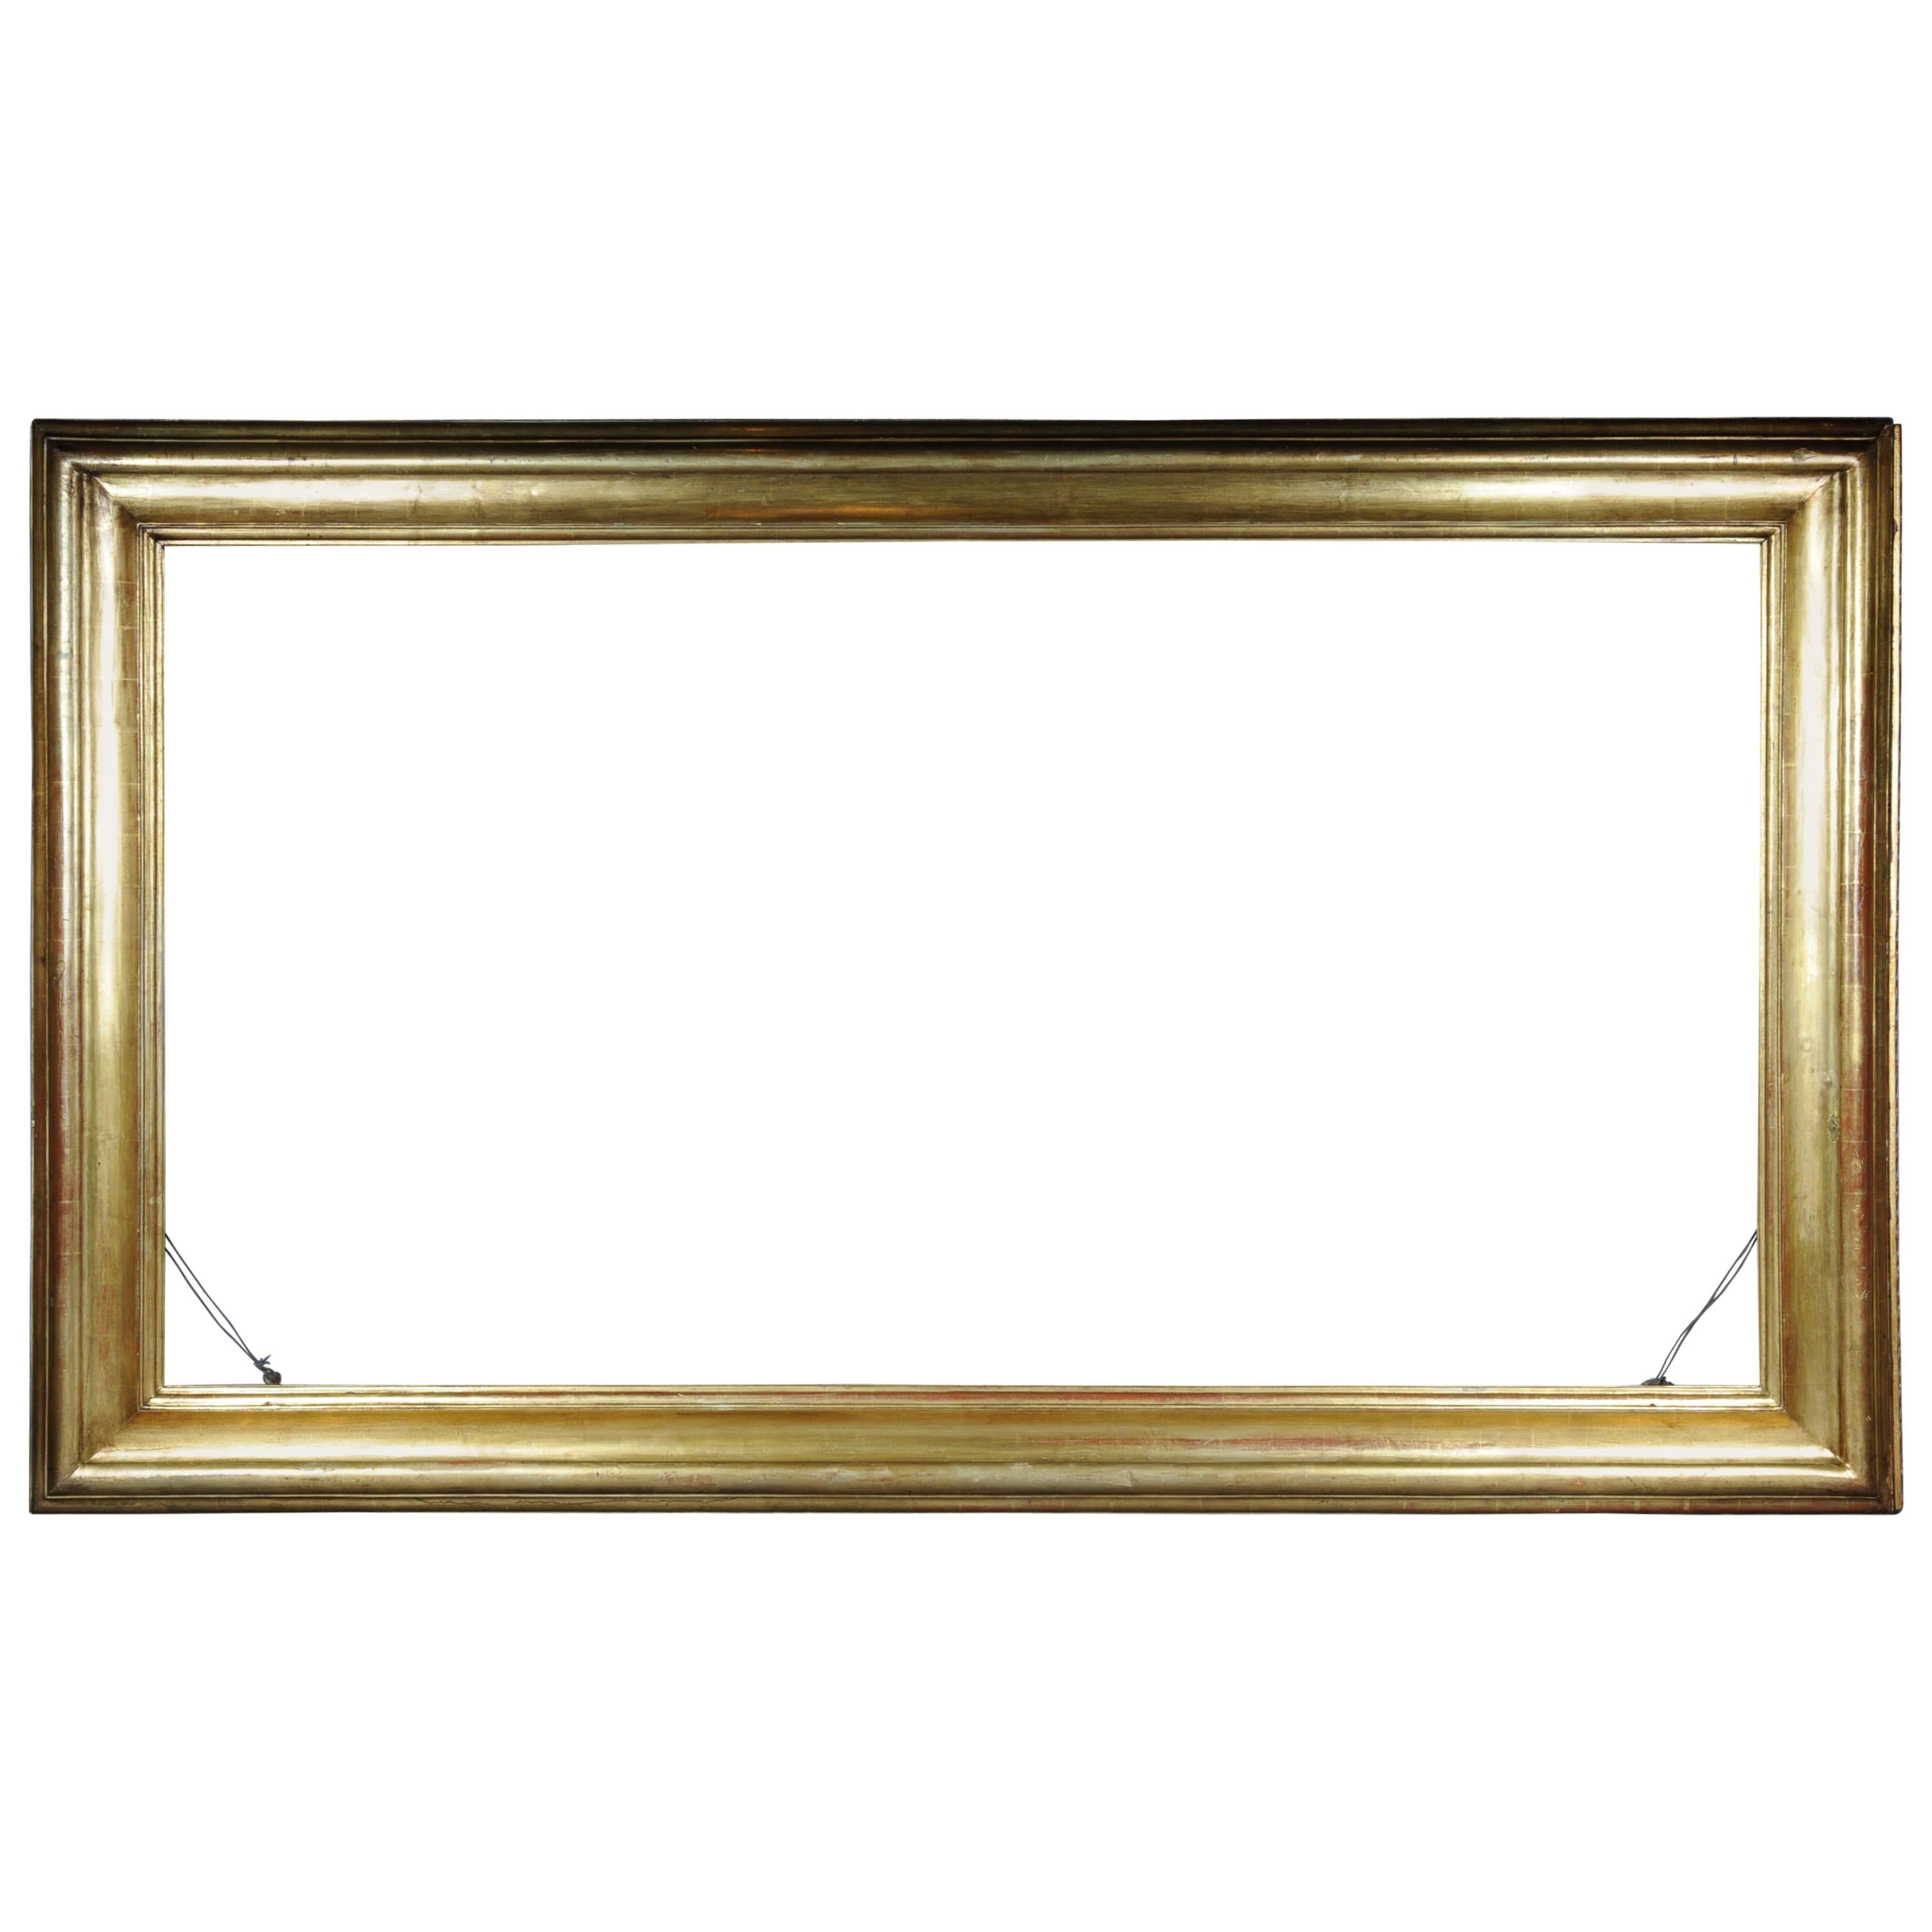 What is a gilded picture frame?